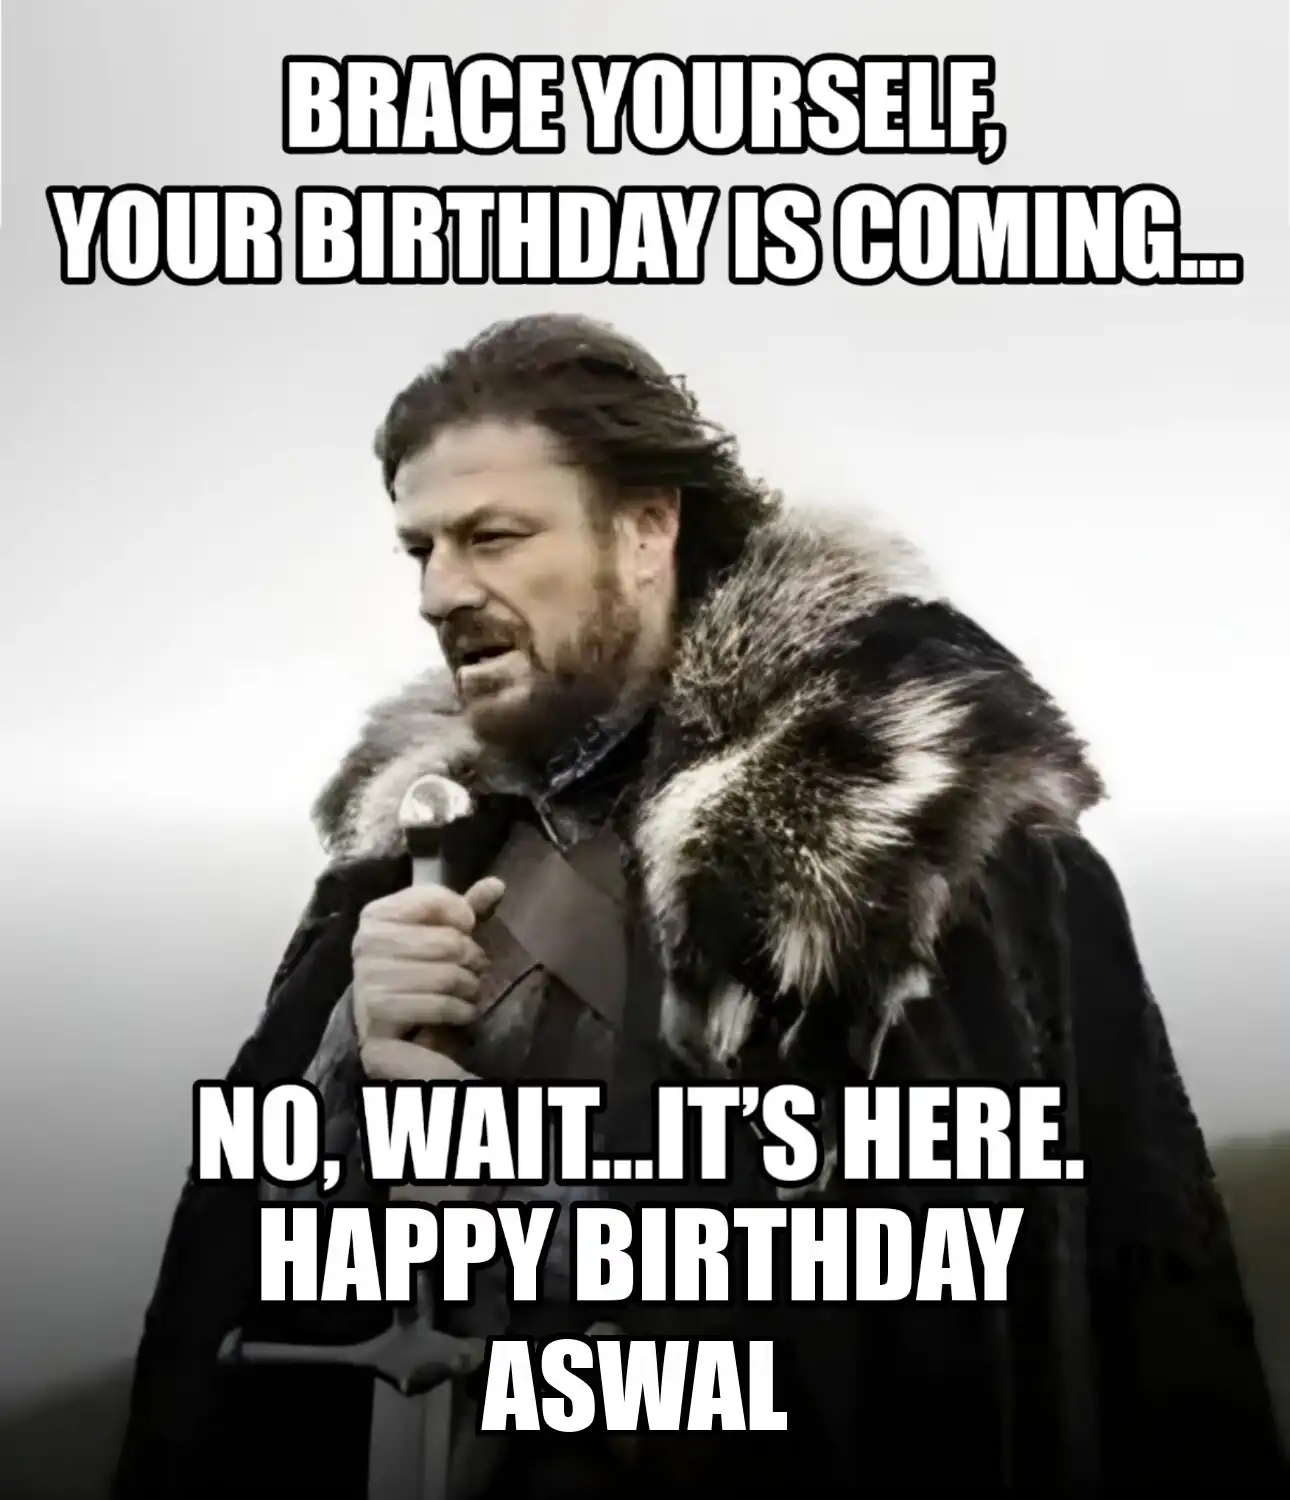 Happy Birthday Aswal Brace Yourself Your Birthday Is Coming Meme